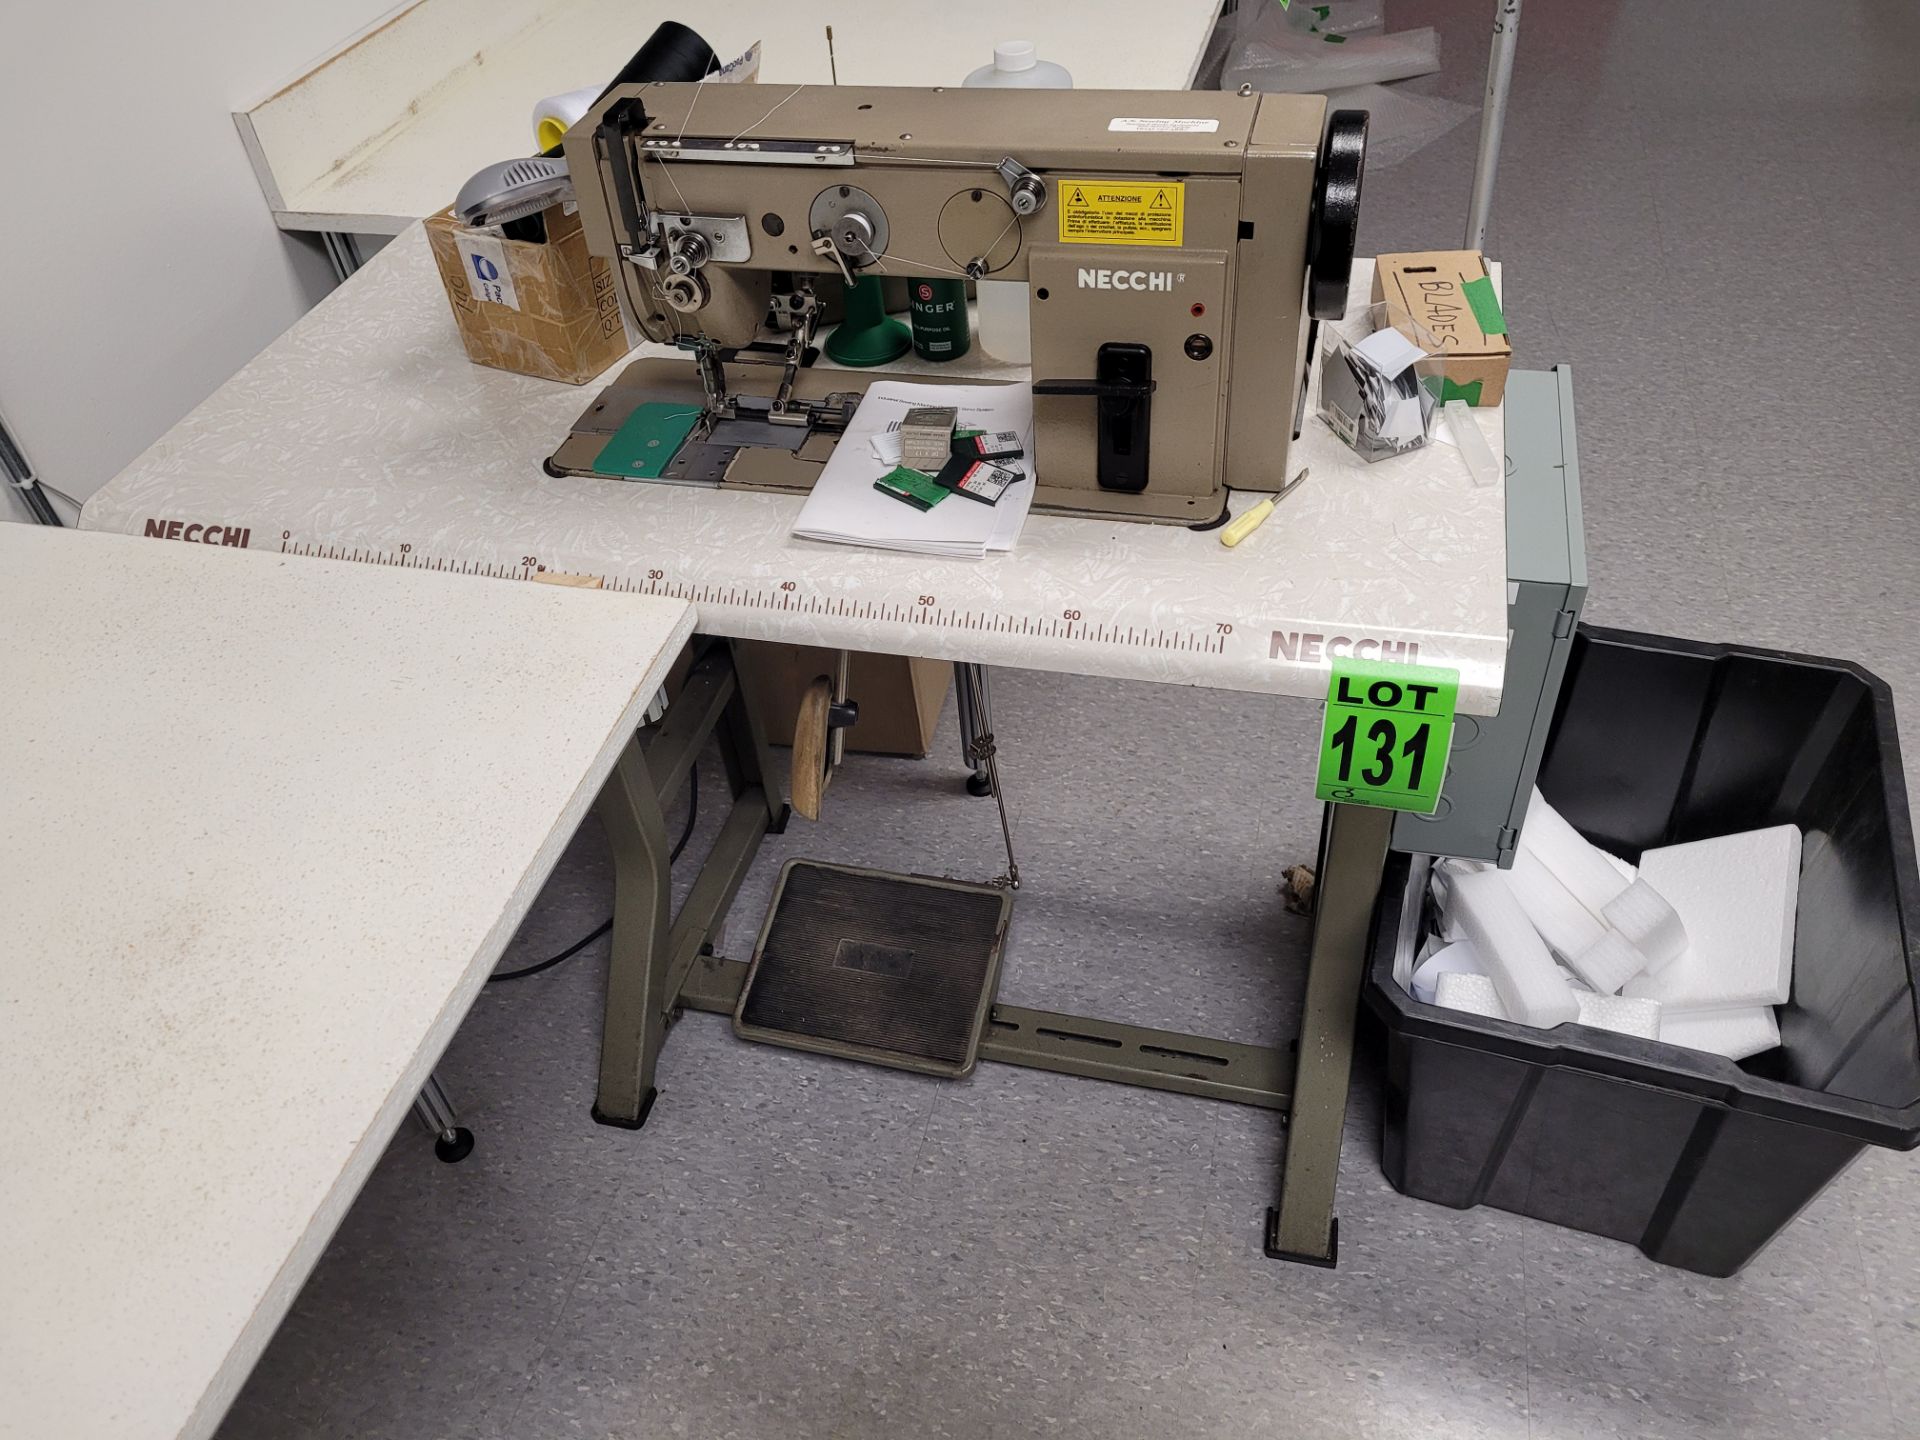 NECCHI mod. 958-101 semi-auto industrial sewing machine and table with accessories